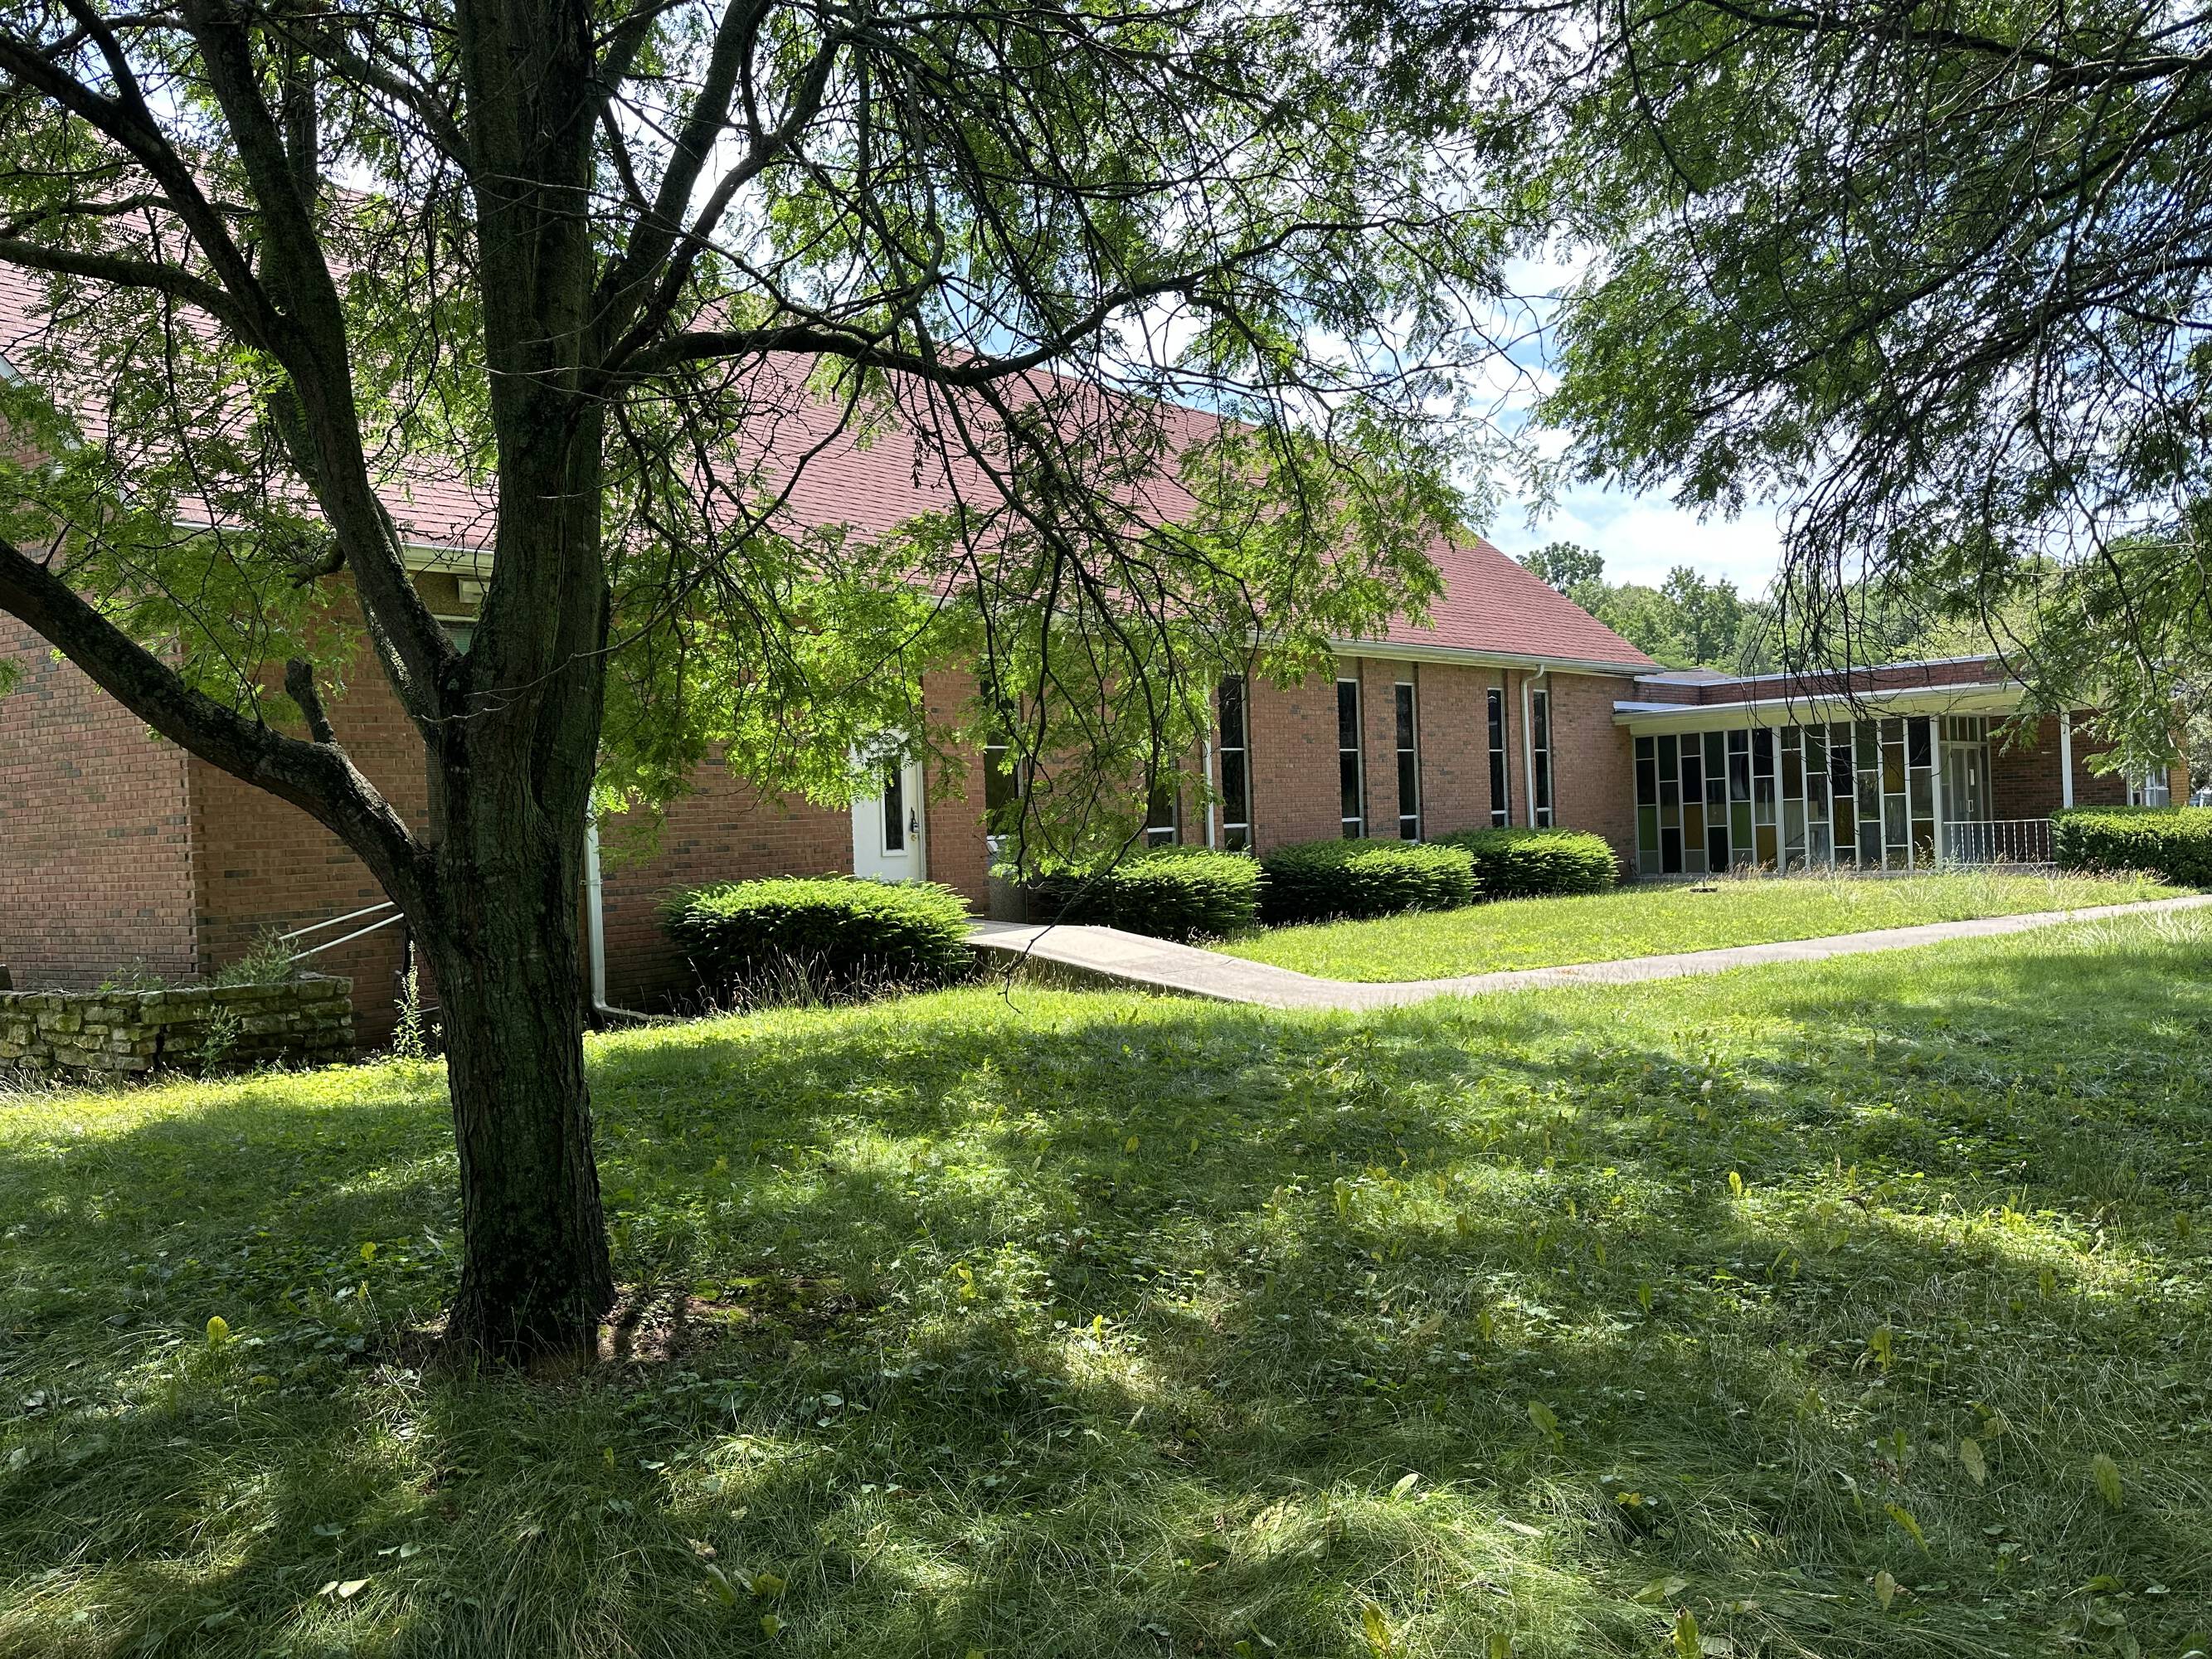 5353 Millersville Rd.,Indianapolis, In 46226. 14,000 sq ft., 1.47 acres. List Price: $400,000. Broker: Dan Moore Real Estate Services Inc.